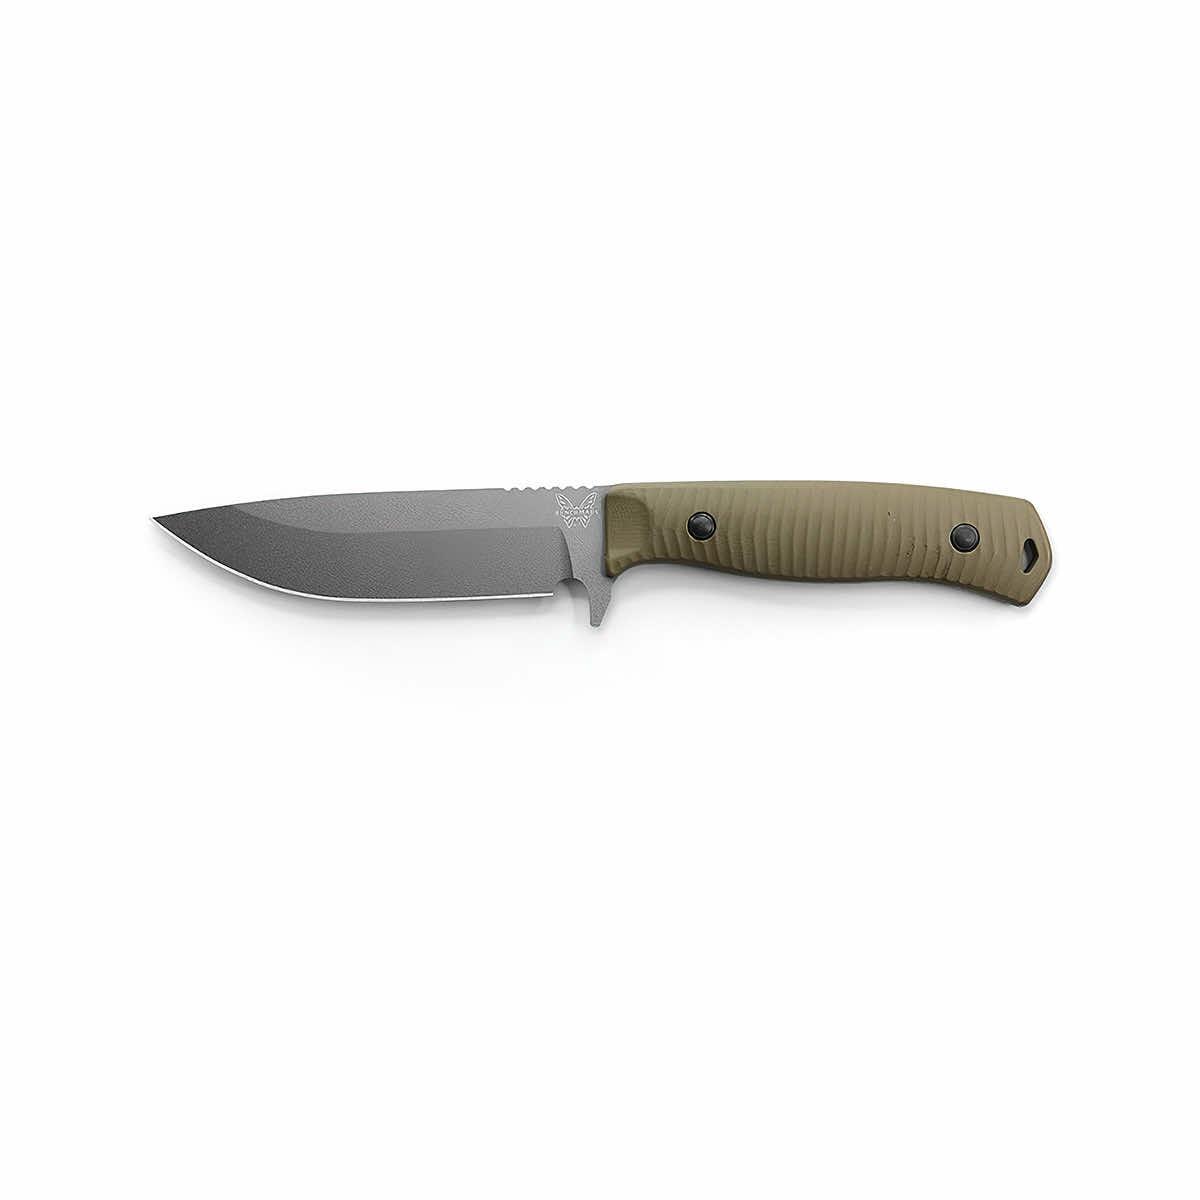 840.LE)-Stainless Steel General Purpose Knife